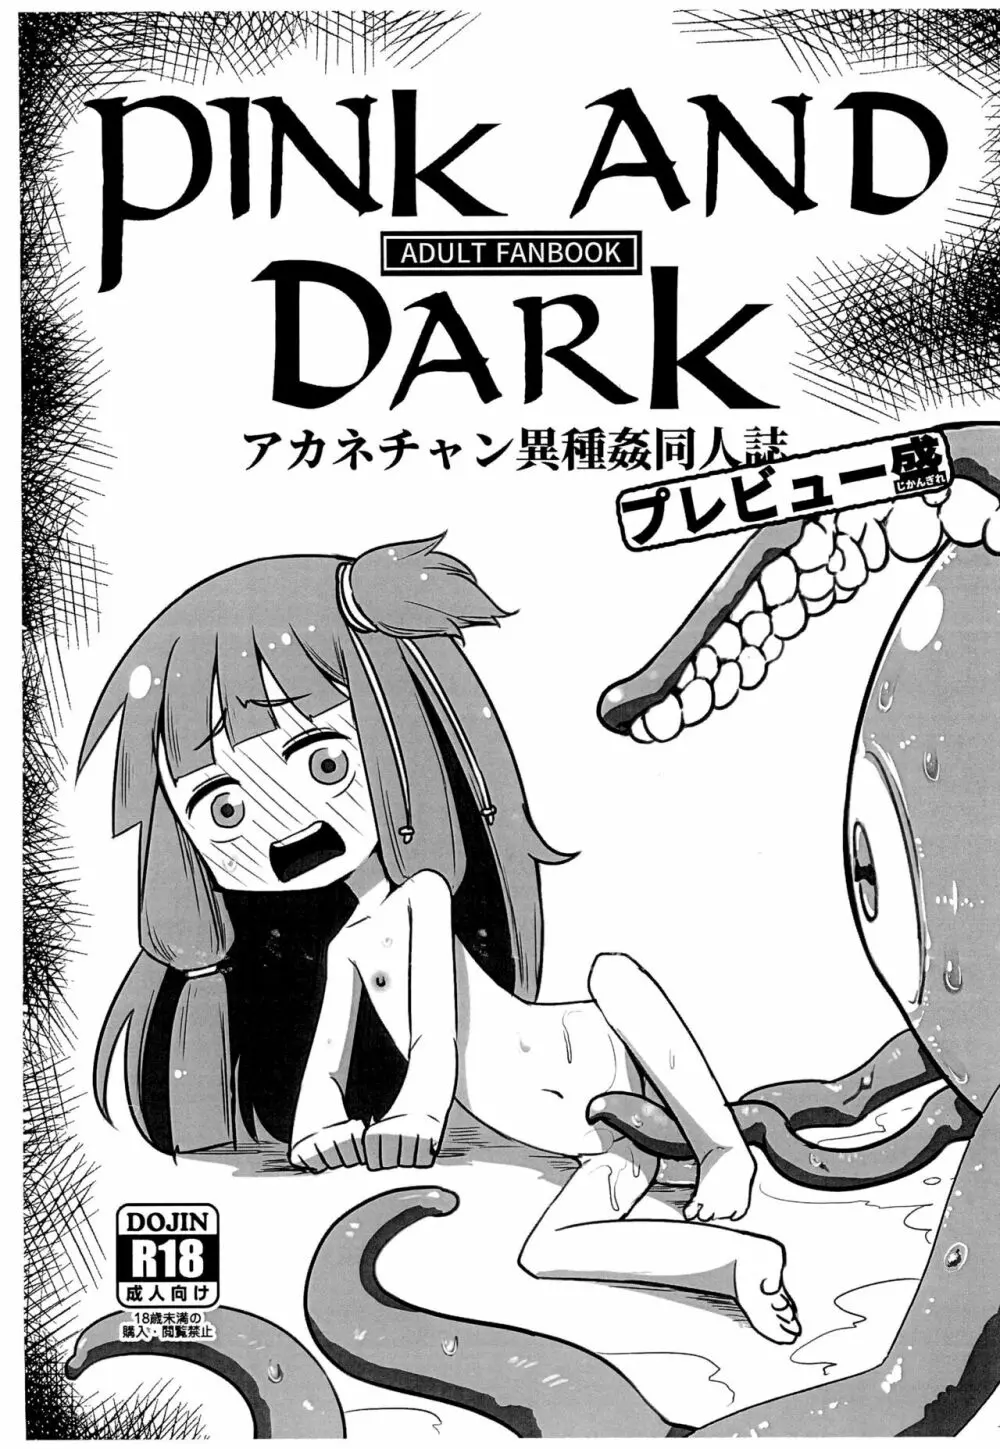 Pink and Dark アカネチャン異種姦同人誌 プレビュー盛 Page.1